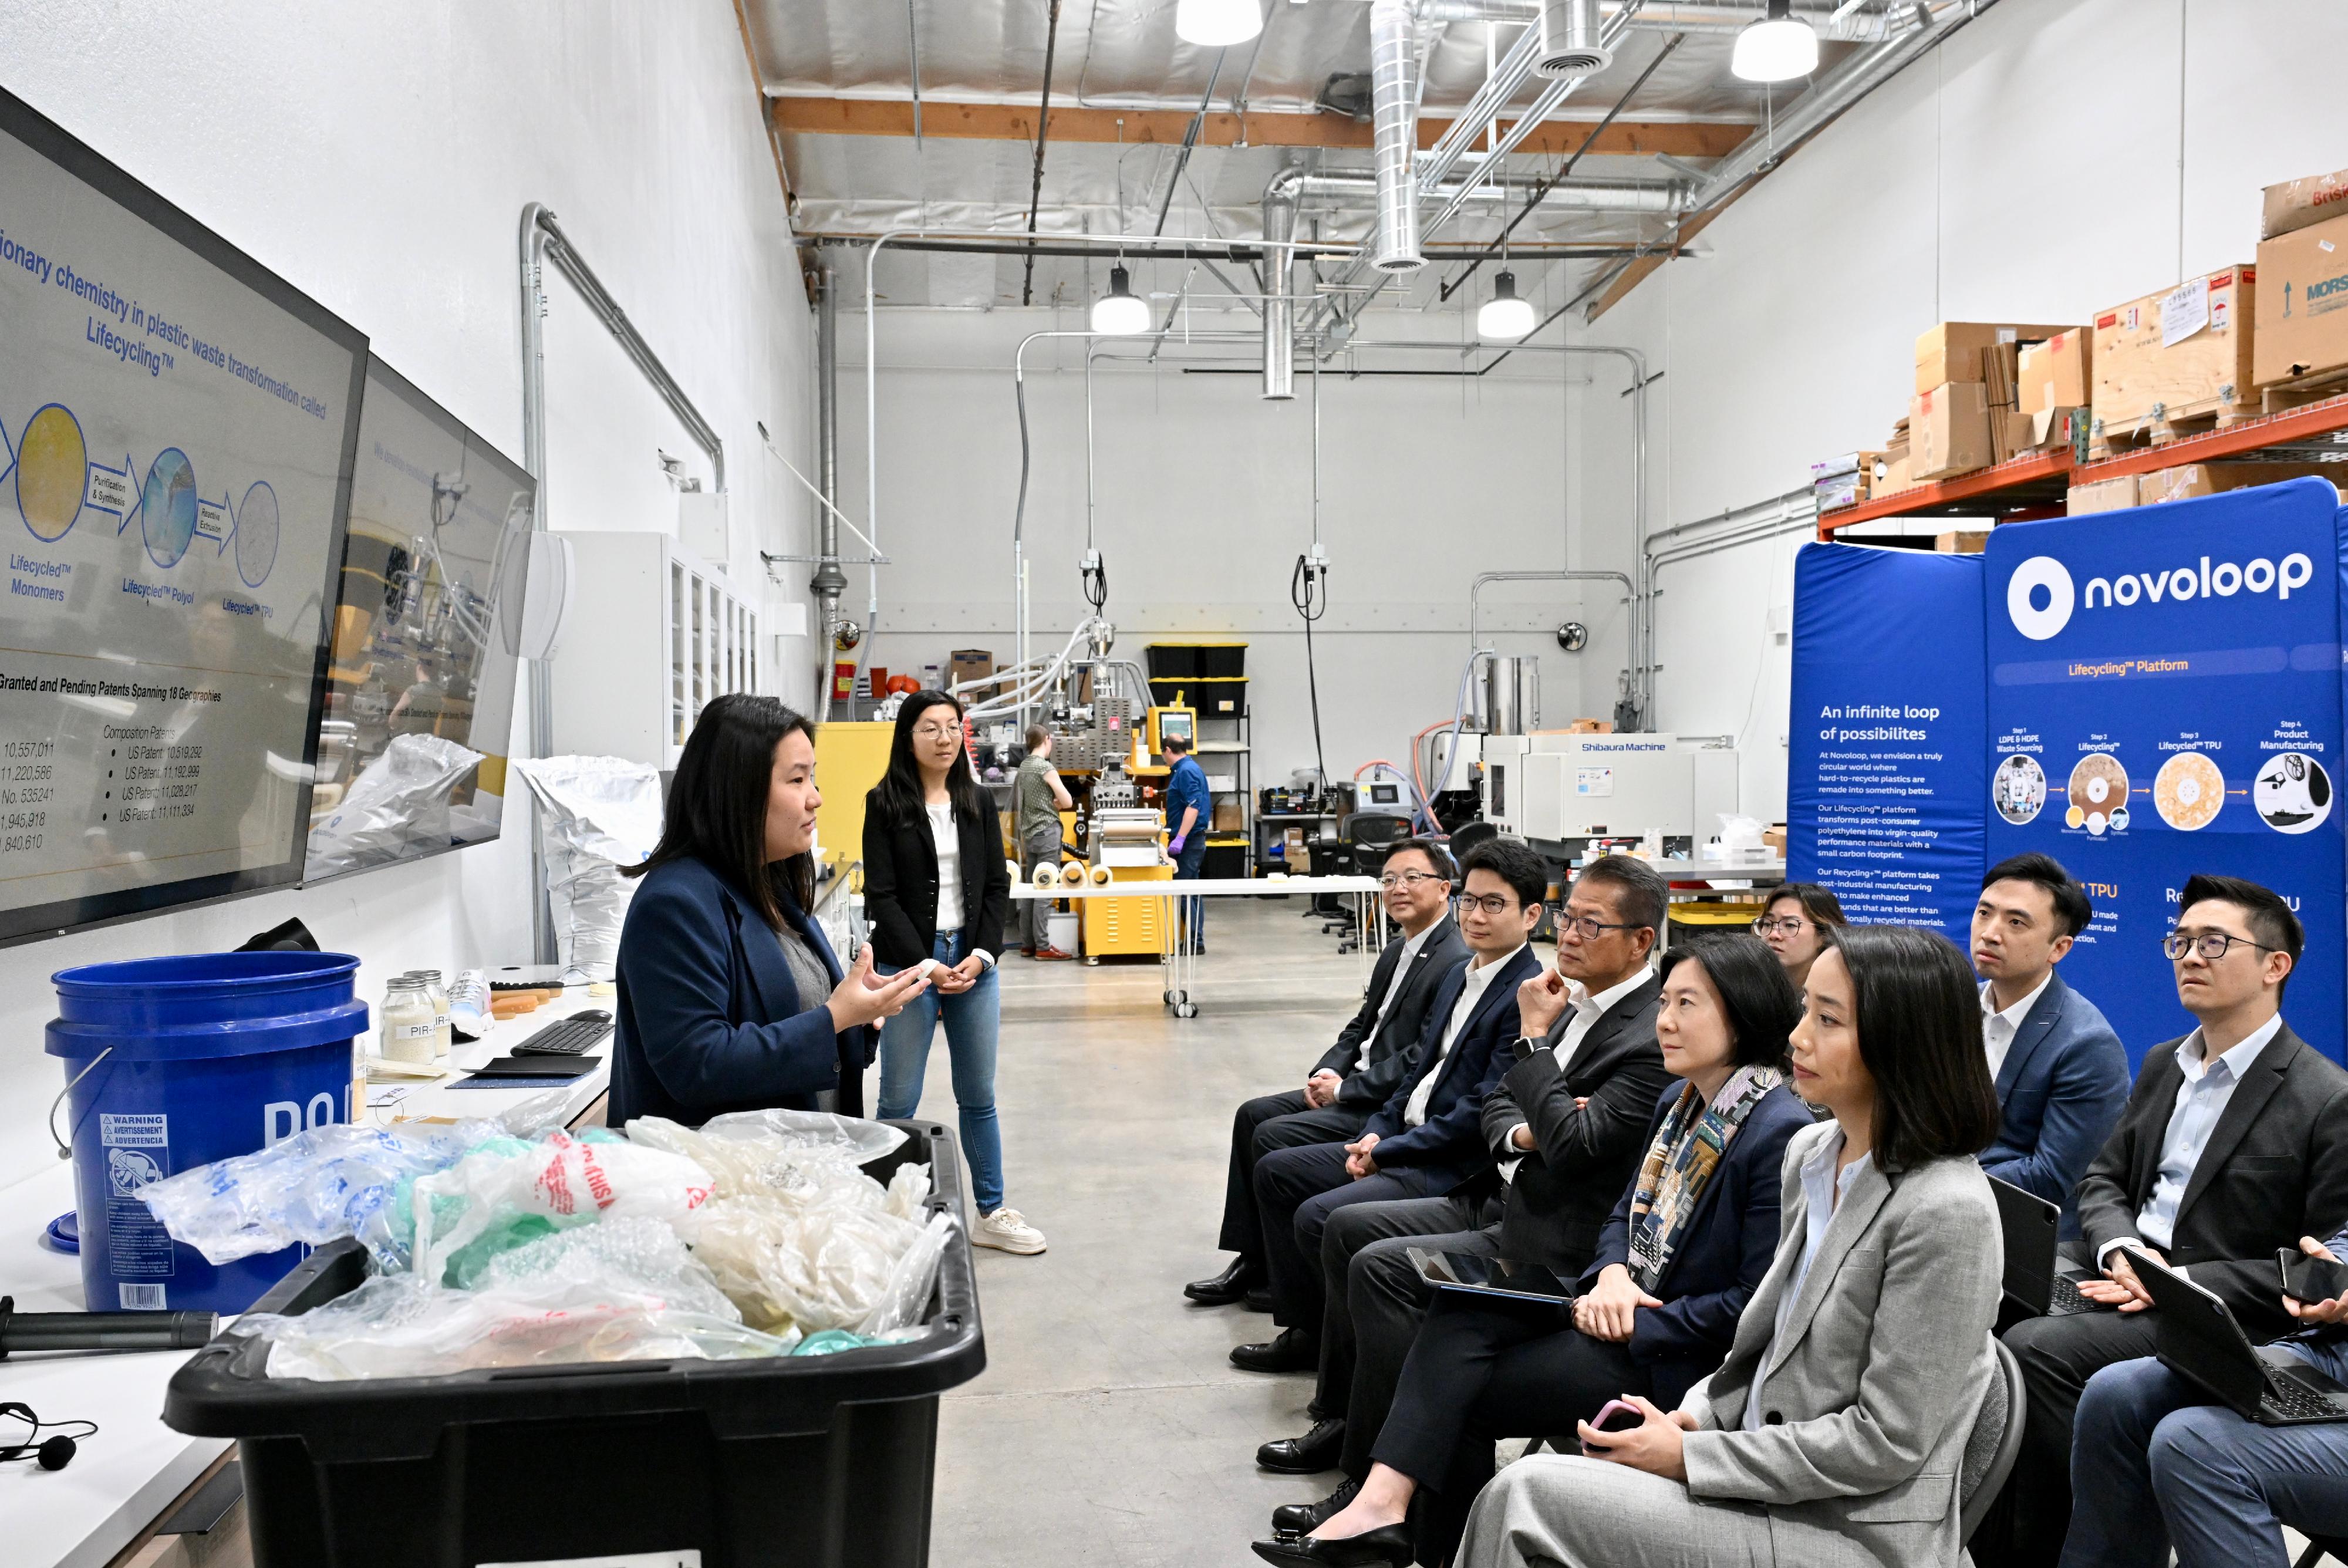 The Financial Secretary, Mr Paul Chan, visited a technology company engaged in plastic materials recycling for reuse in San Francisco, the United States, on May 30 (California time). Photo shows Mr Chan (sitting, from row, centre), being briefed by the founder and management of the technology company on their patented technology.